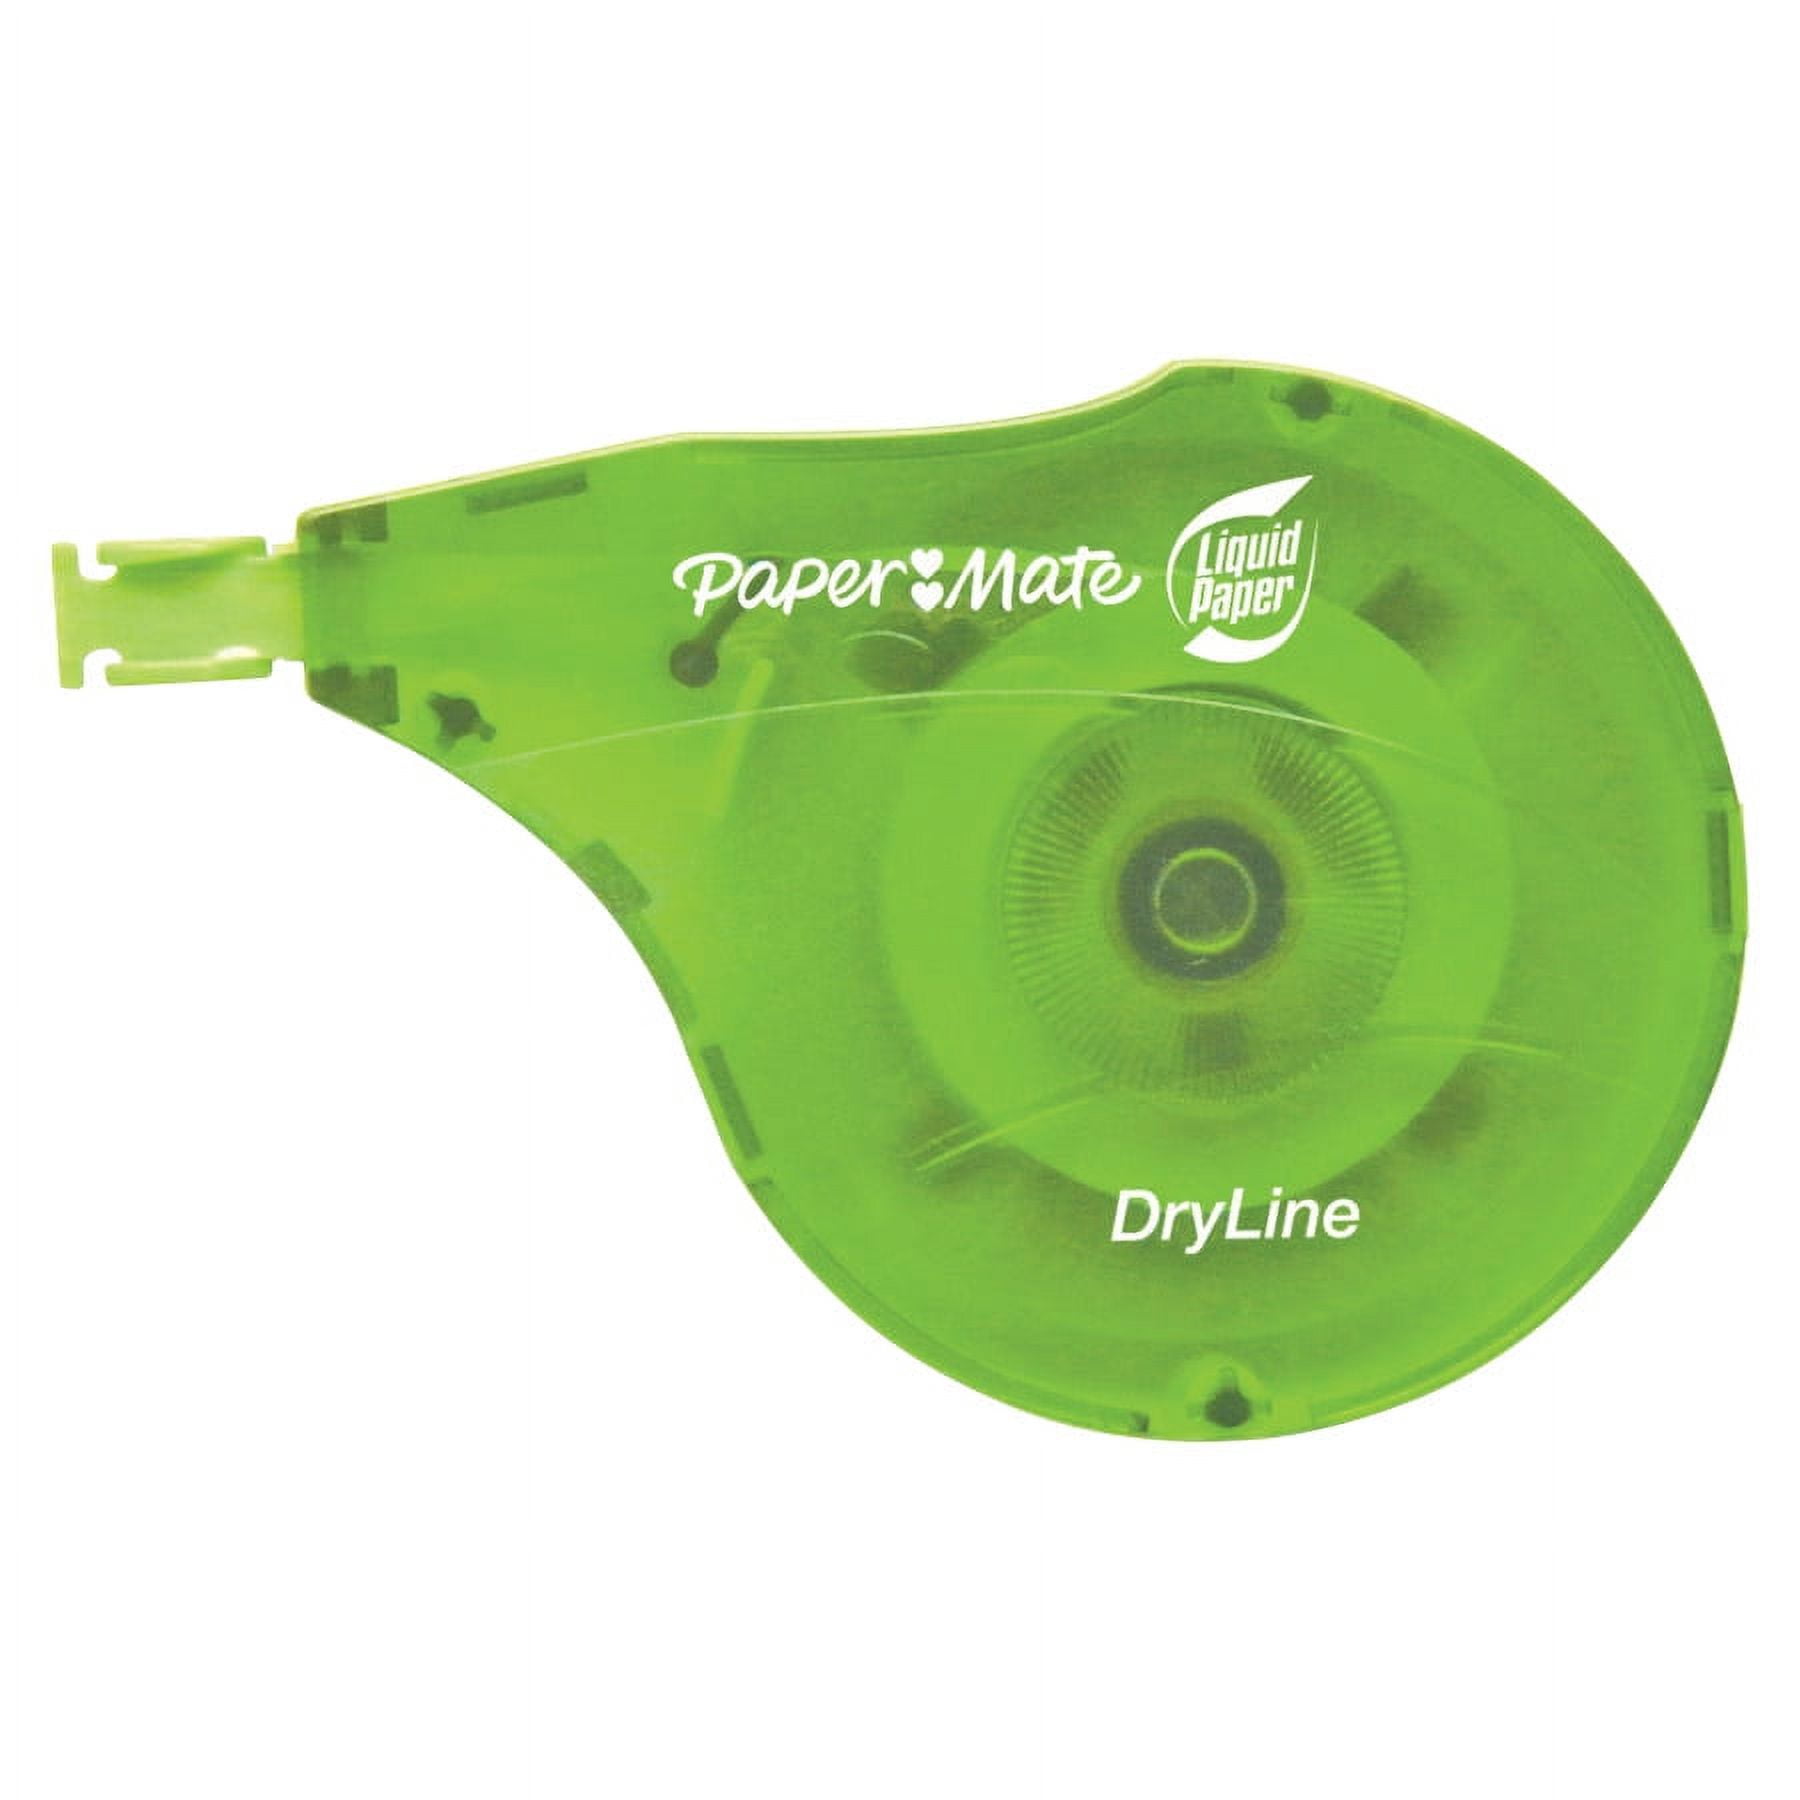 Paper Mate 660415 Liquid Paper DryLine Grip Correction Tape Dispenser,  Blister Pack with 1 unit; Transparent Green Body; 1/5 inches Wide x 27.8  feet